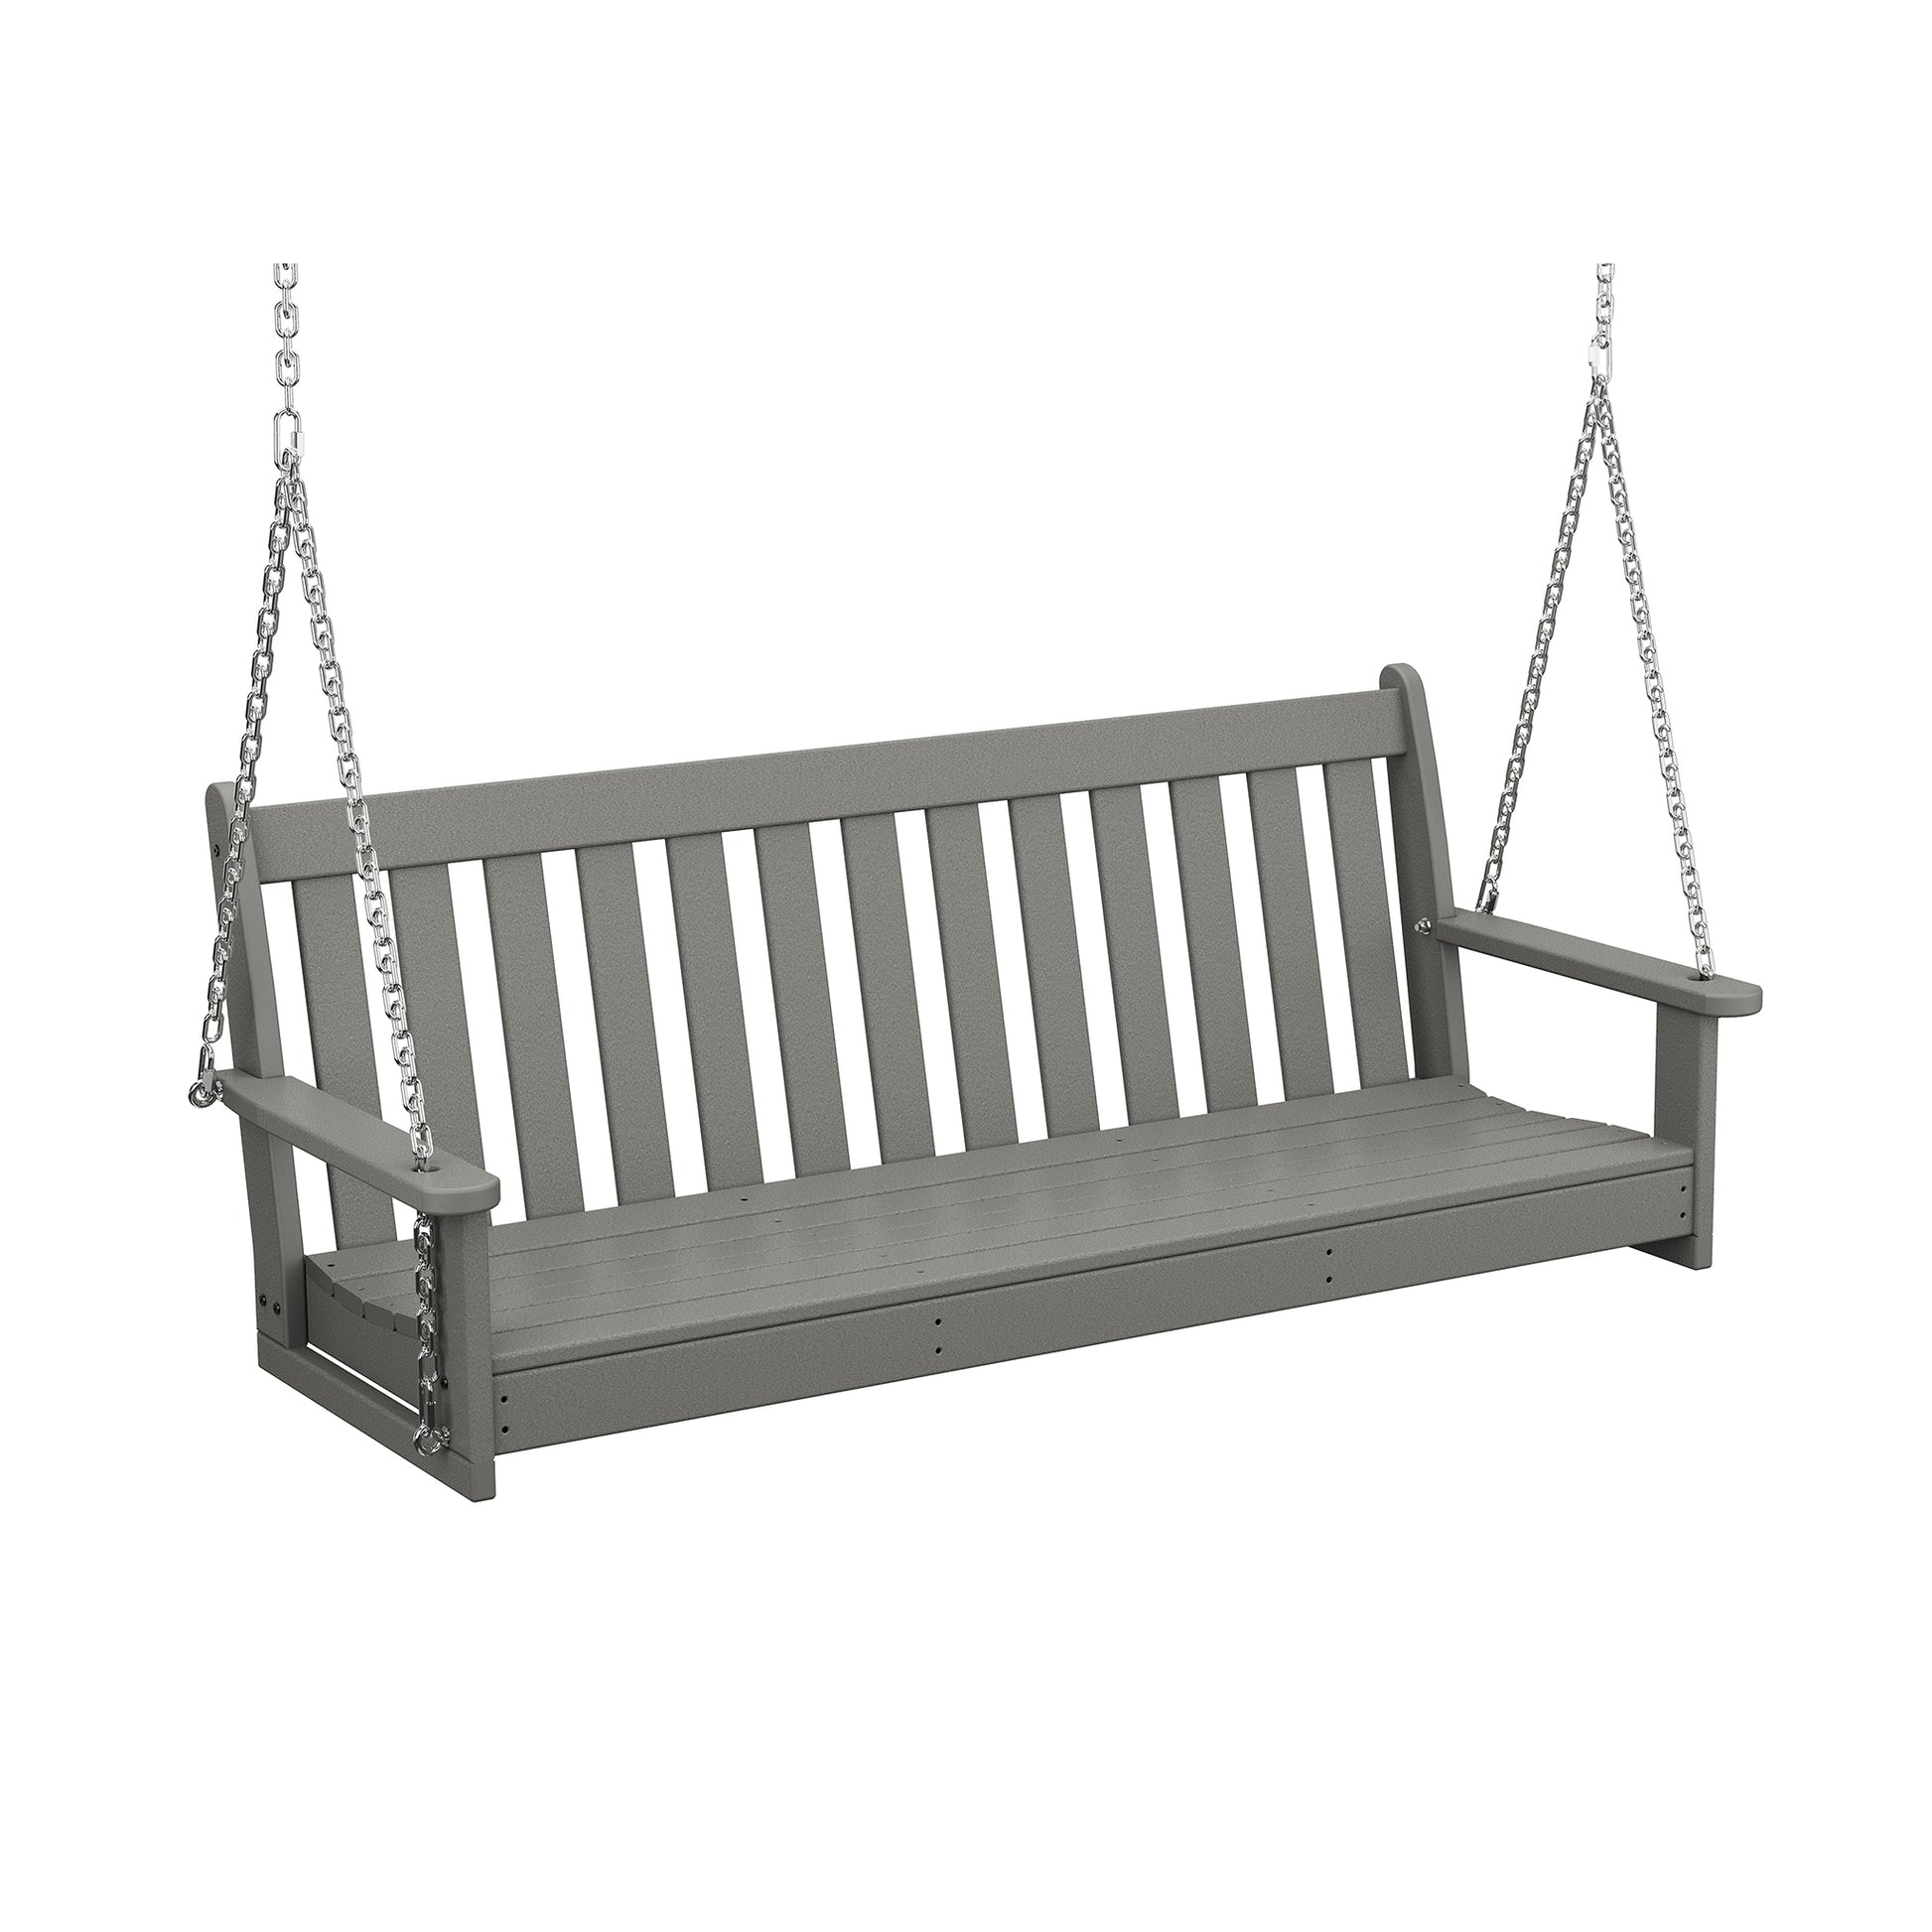 A gray POLYWOOD® Vineyard 60" porch swing suspended by chains against a white background. The swing features a slatted back and seat with armrests on both sides.